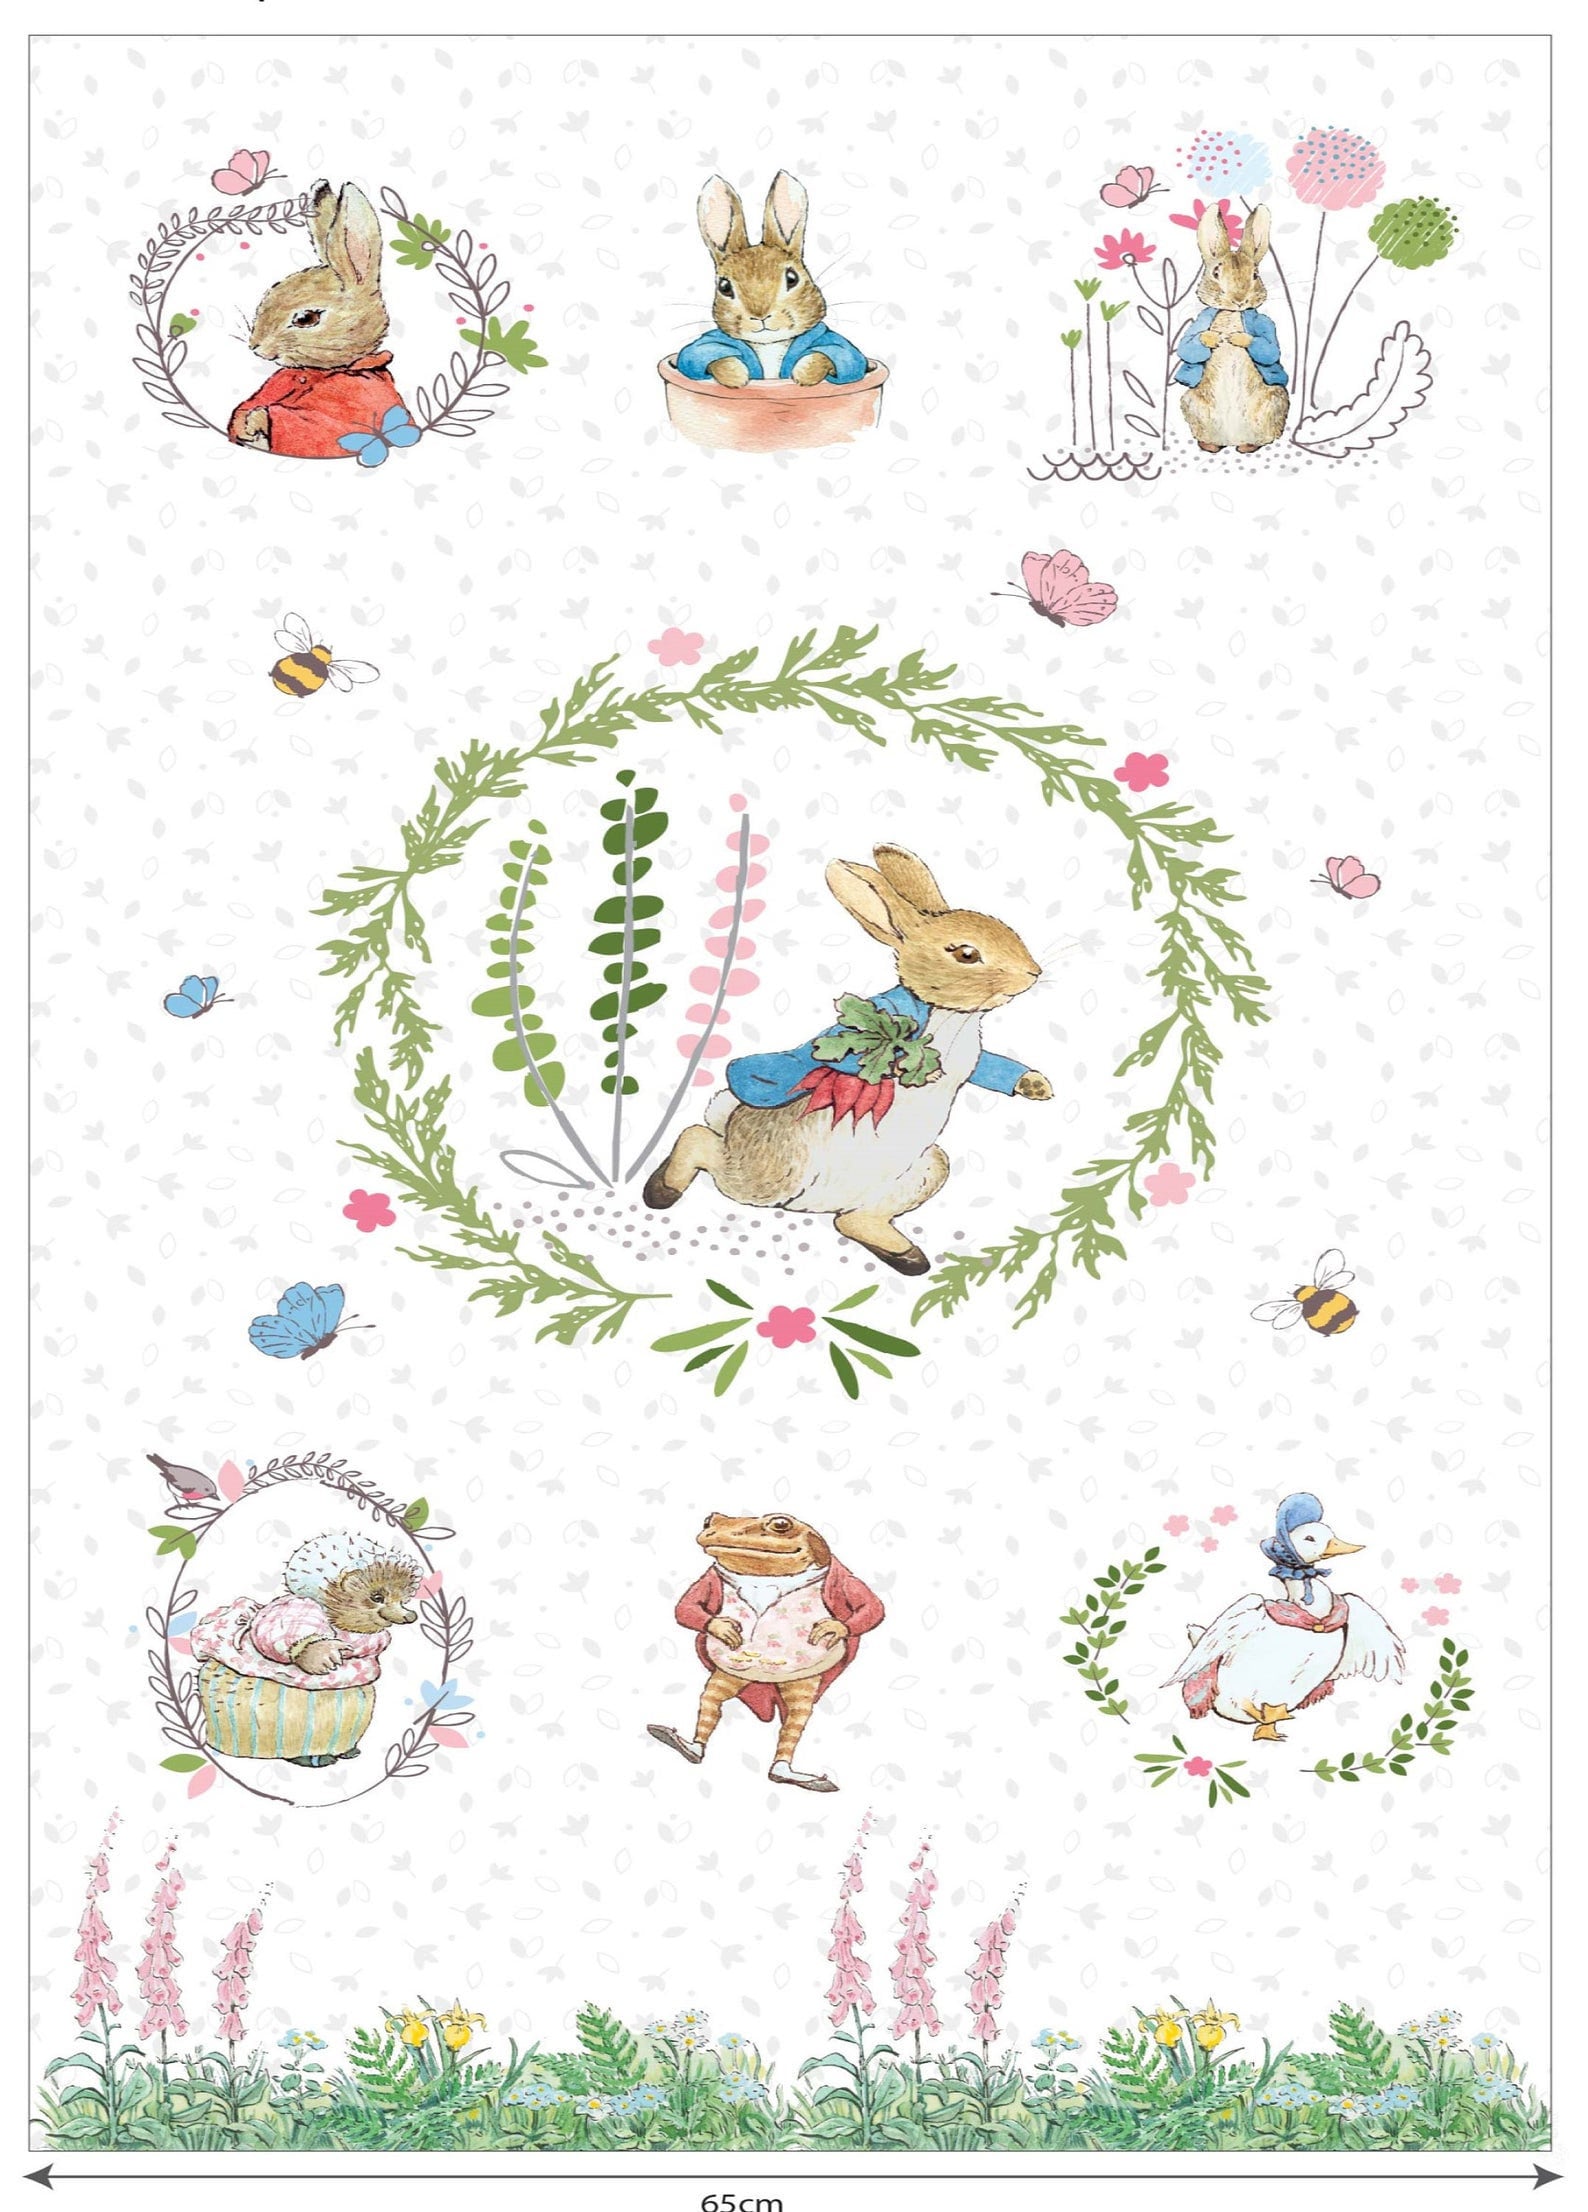 Upholstery Peter Rabbit Tiggywinkle Floral Circle PrintedFabric Craft Panels in 100% Cotton or Polyester Sewing 16x16-21x21 inch